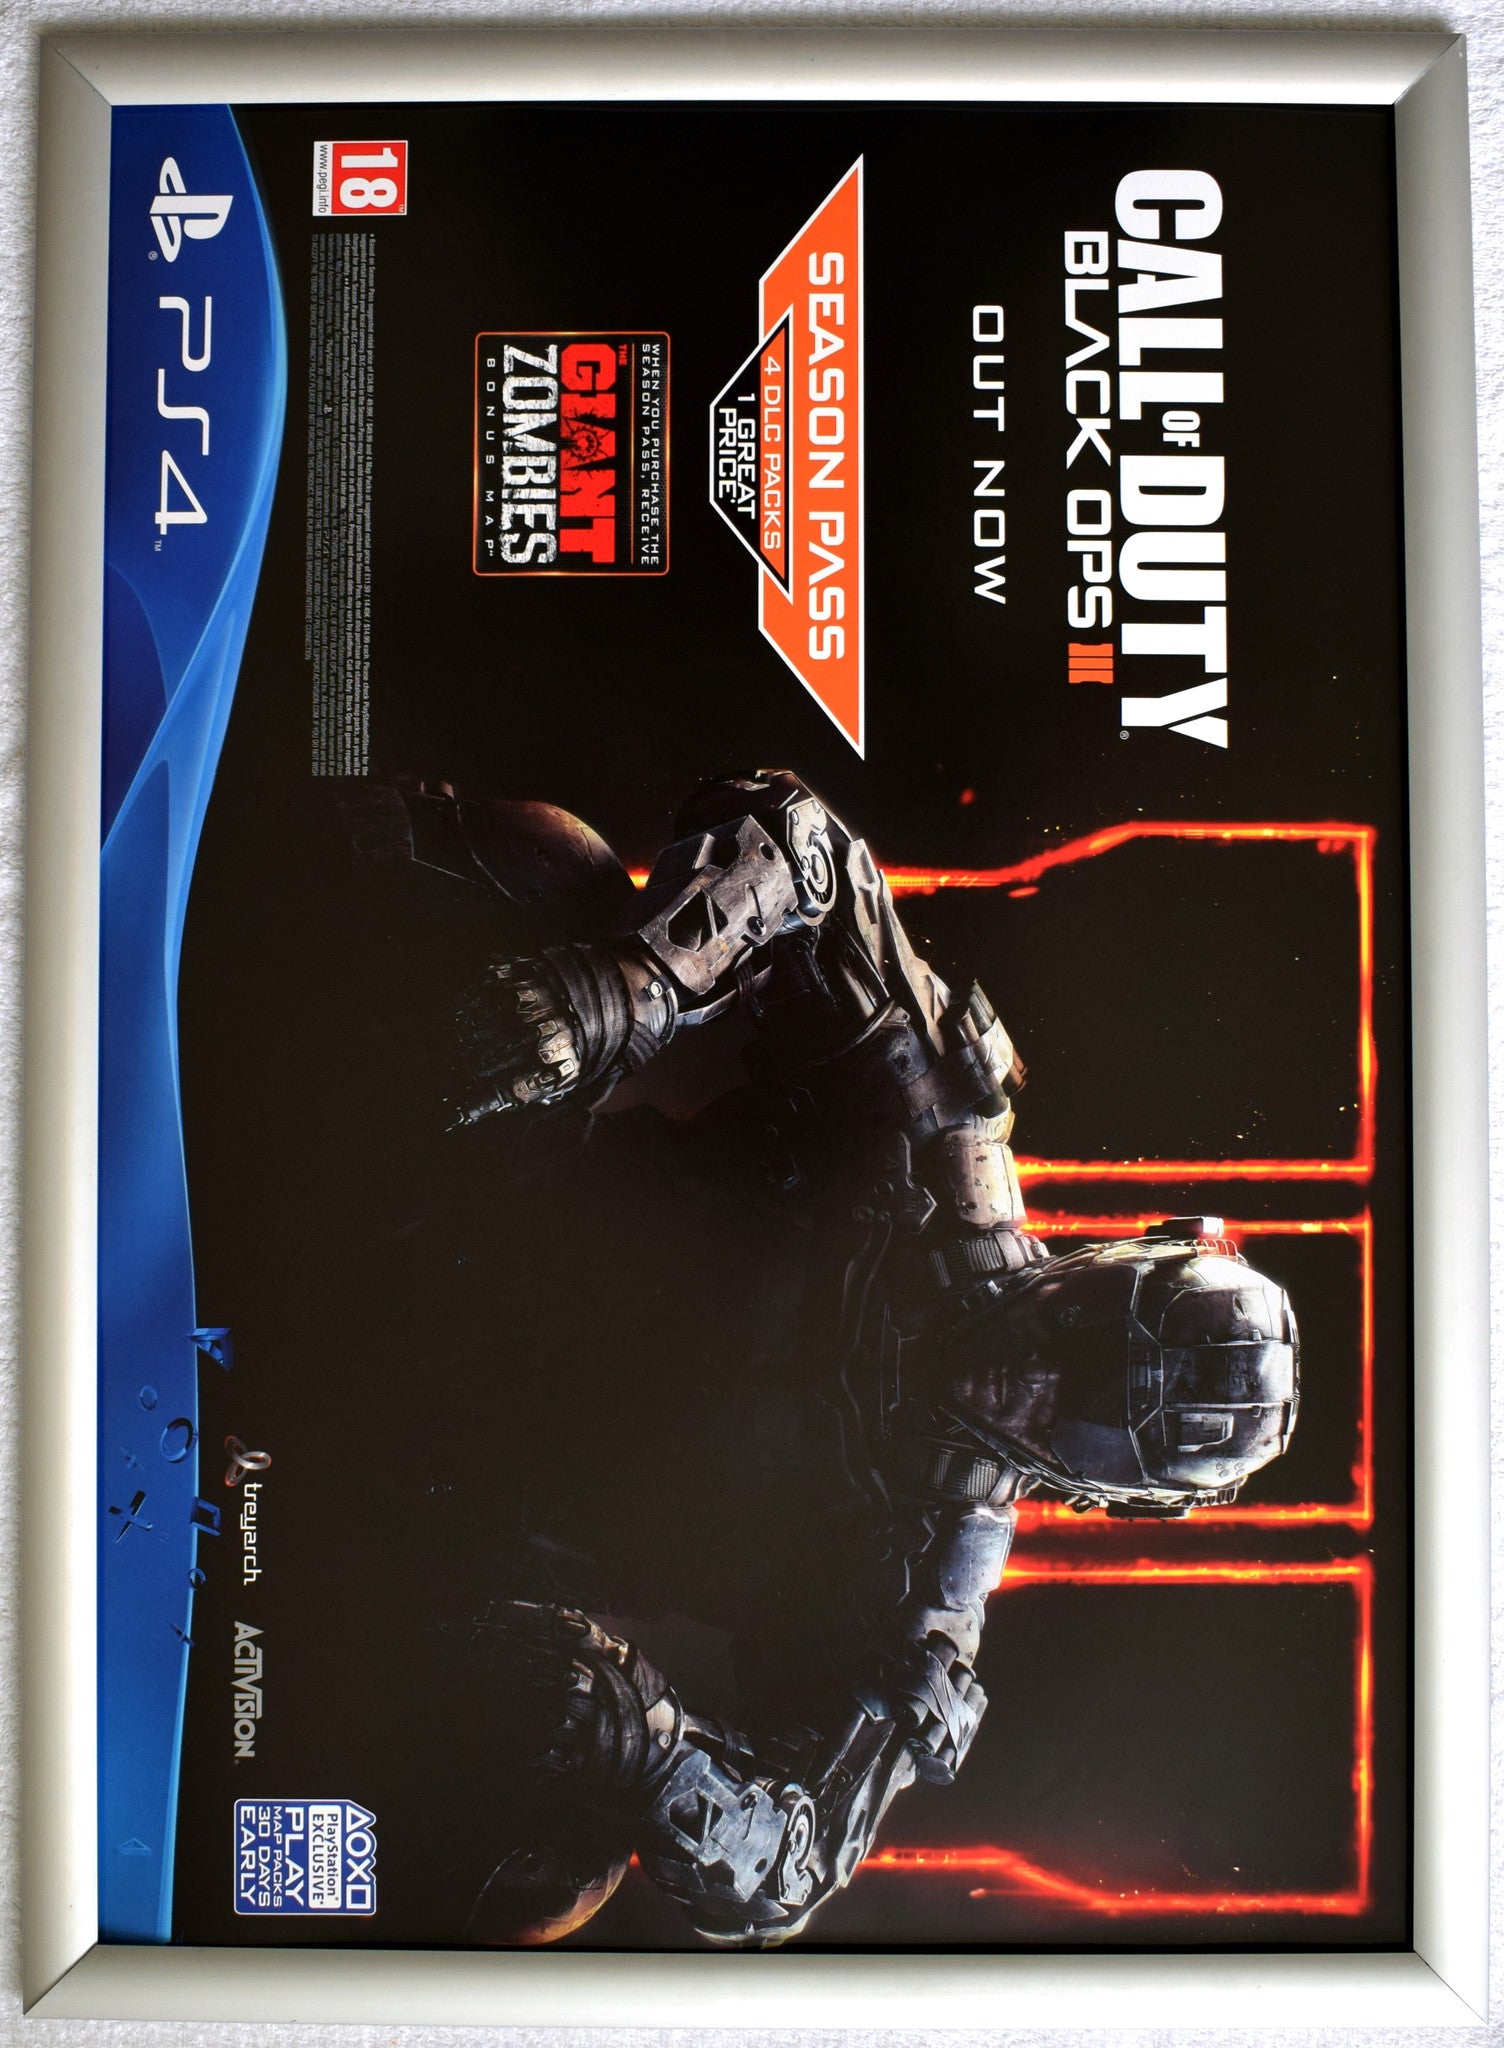 Call of Duty Black Ops 3 (A2) Promotional Poster #4